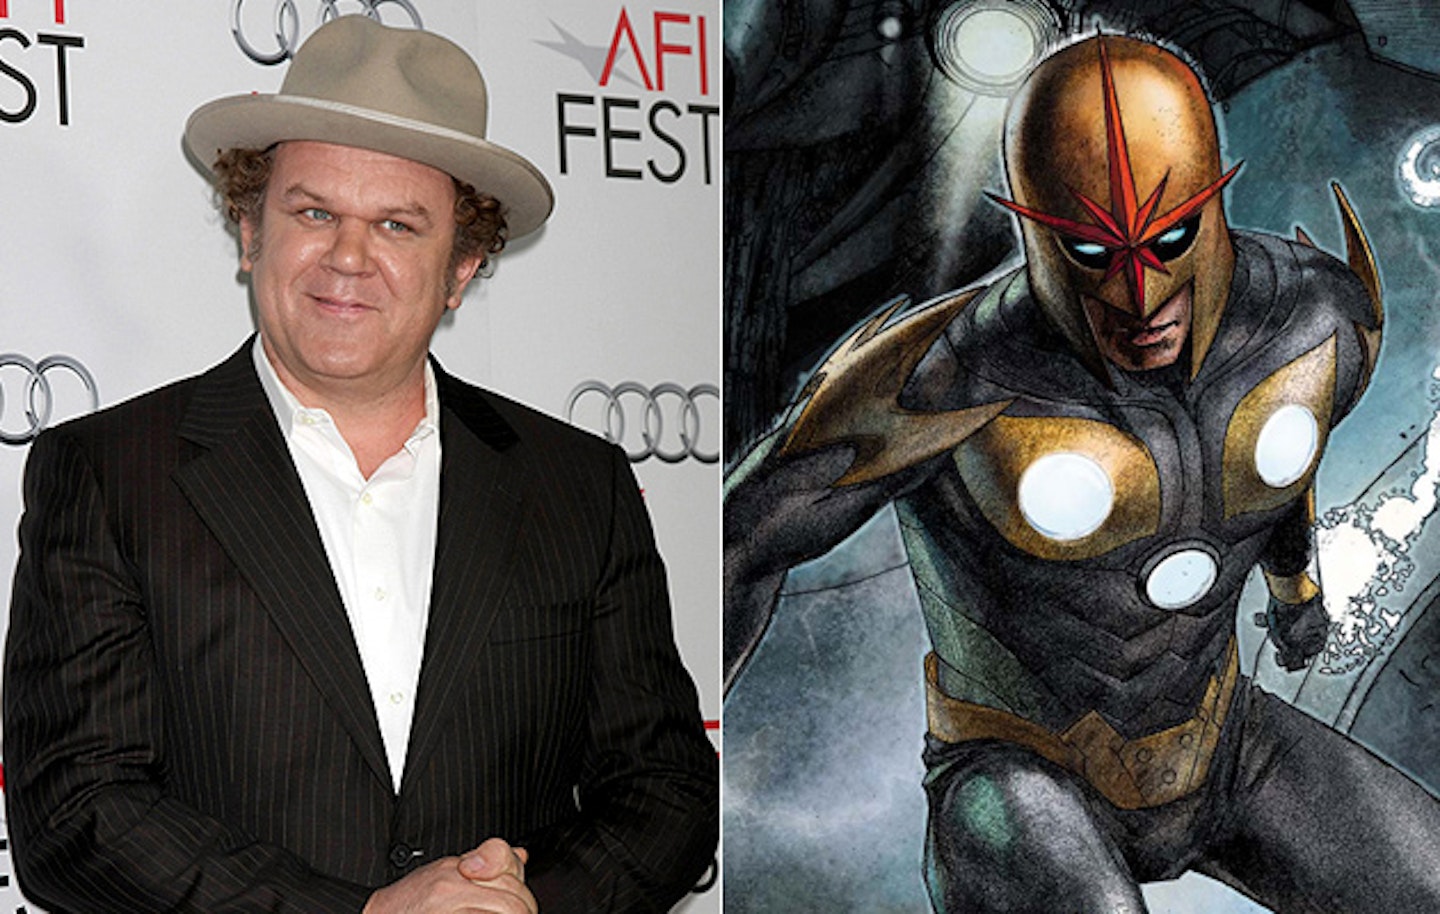 John C. Reilly Confirmed For Guardians Of The Galaxy